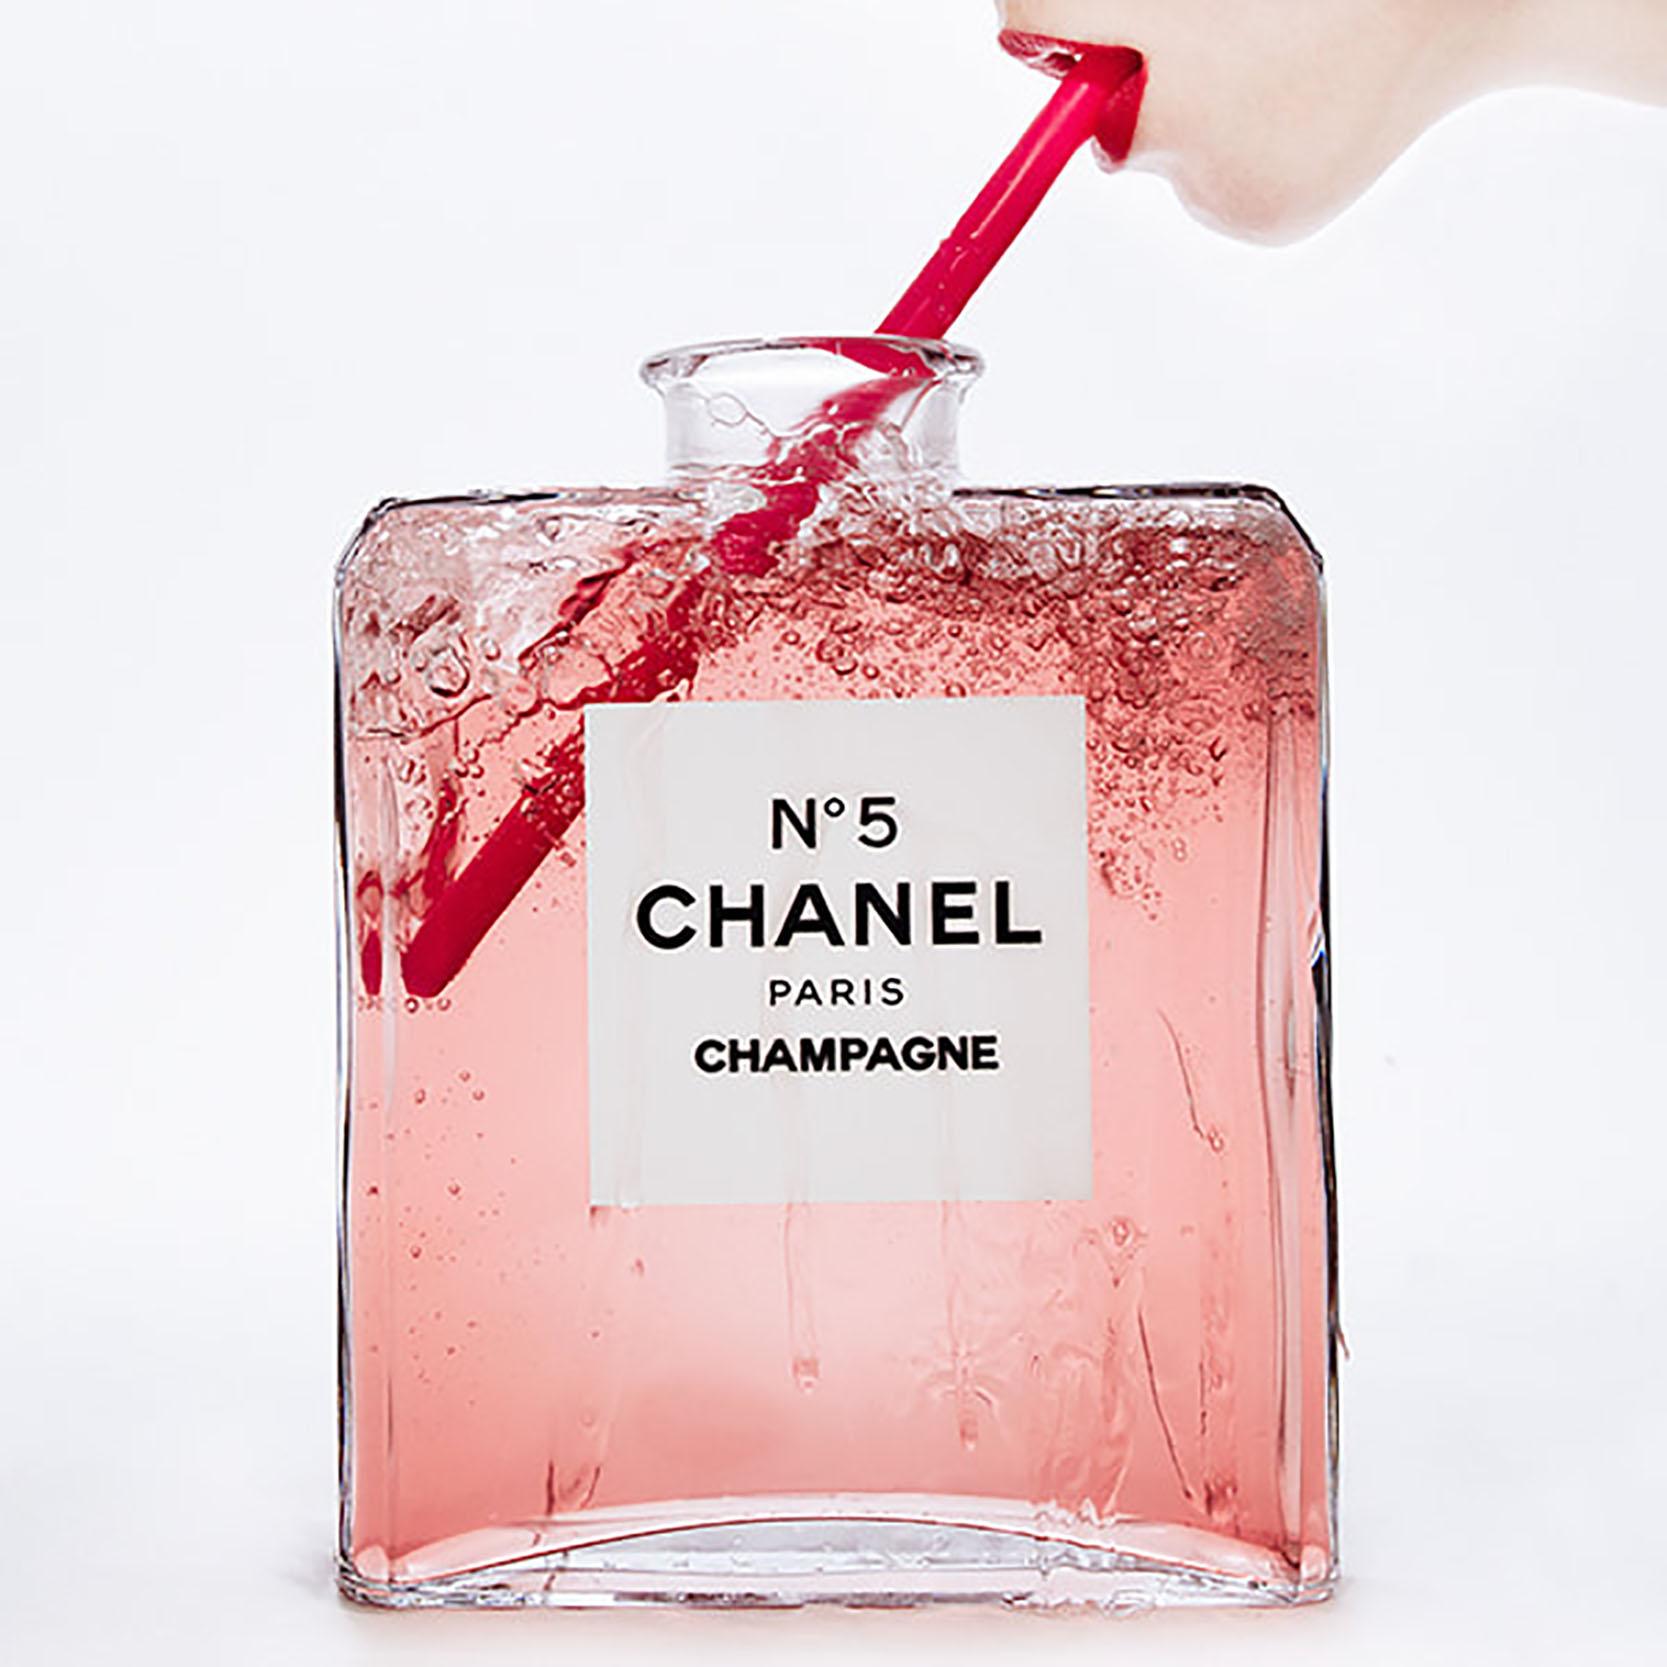 Tyler Shields, 'Chanel Champagne', 2016
Medium: C-type Photographic Print
18 x 18 "
Signature: Signed Certificate of Authenticity
Unframed
Edition of 3
Contemporary Art Photography
*May require additional handling or framing time
To the trade